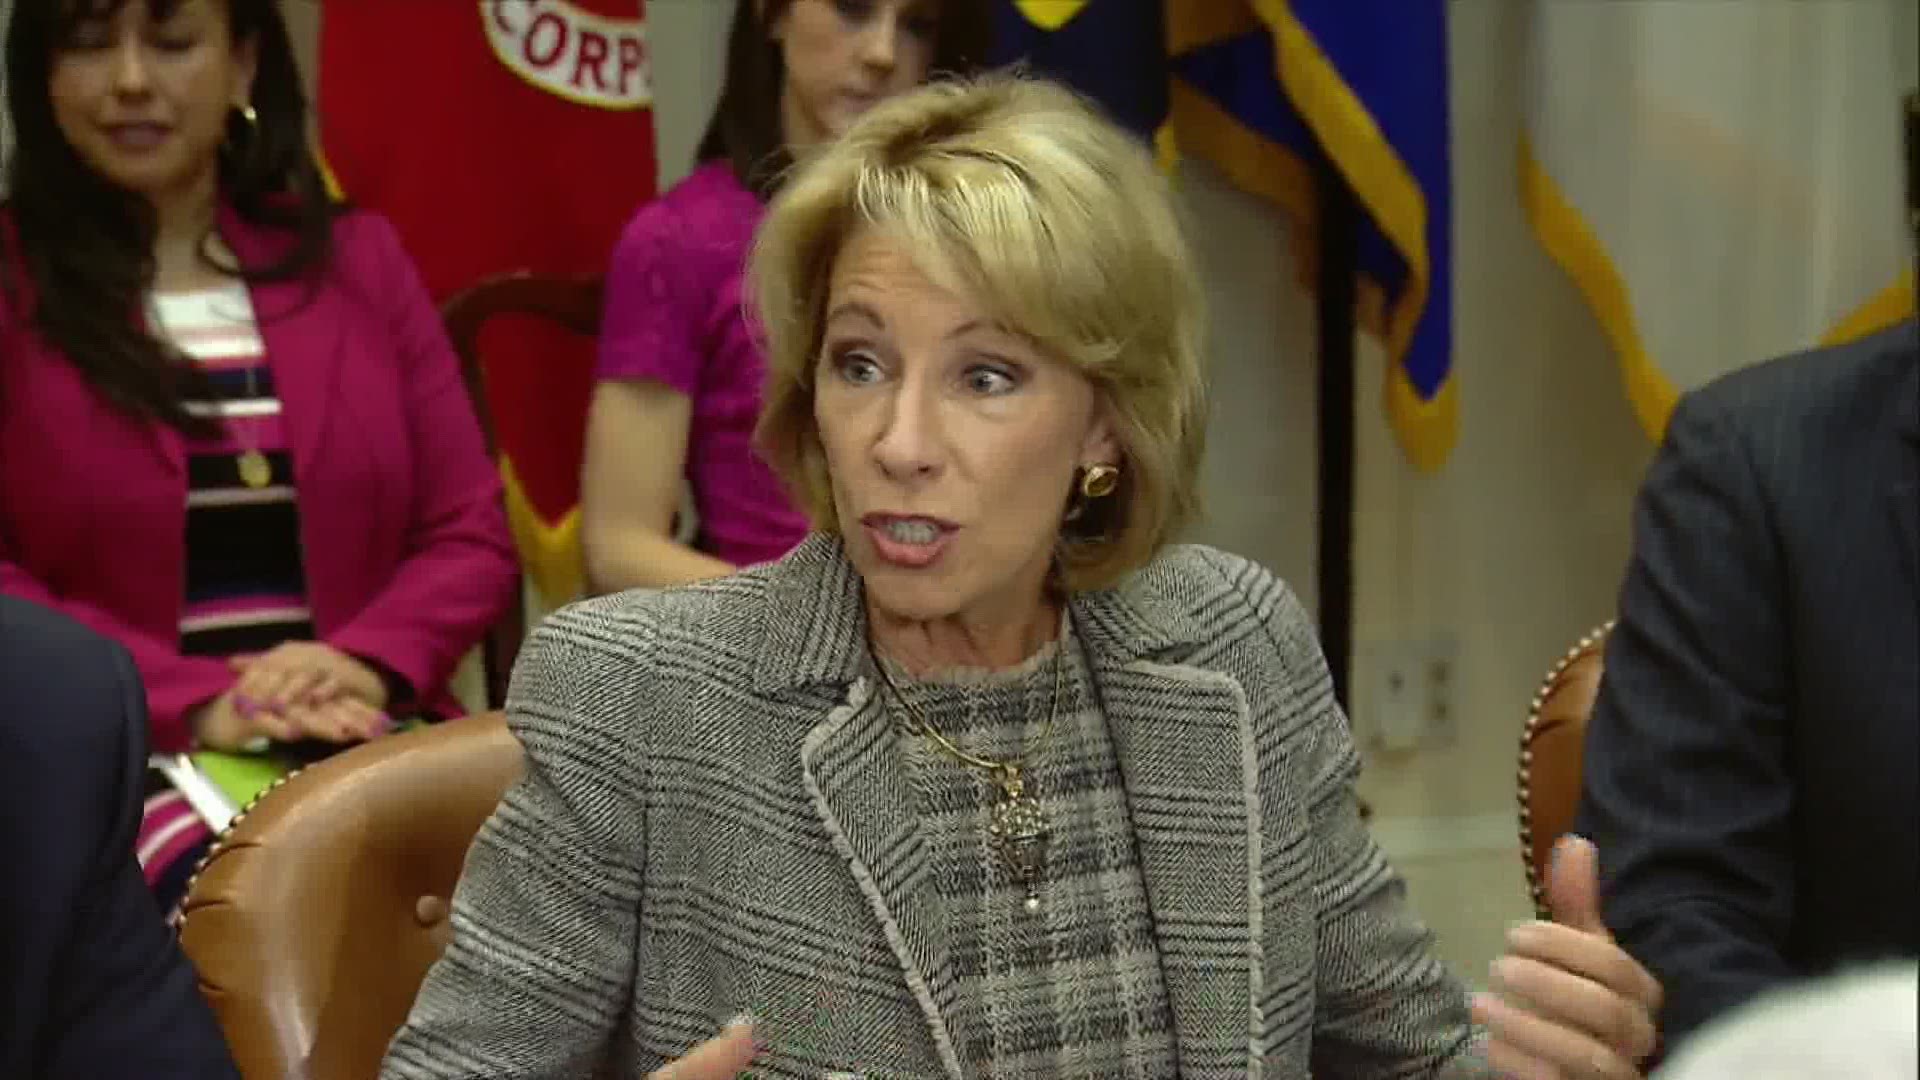 Michigan joins 22 other states suing U.S. Education Secretary Betsy DeVos over student loans